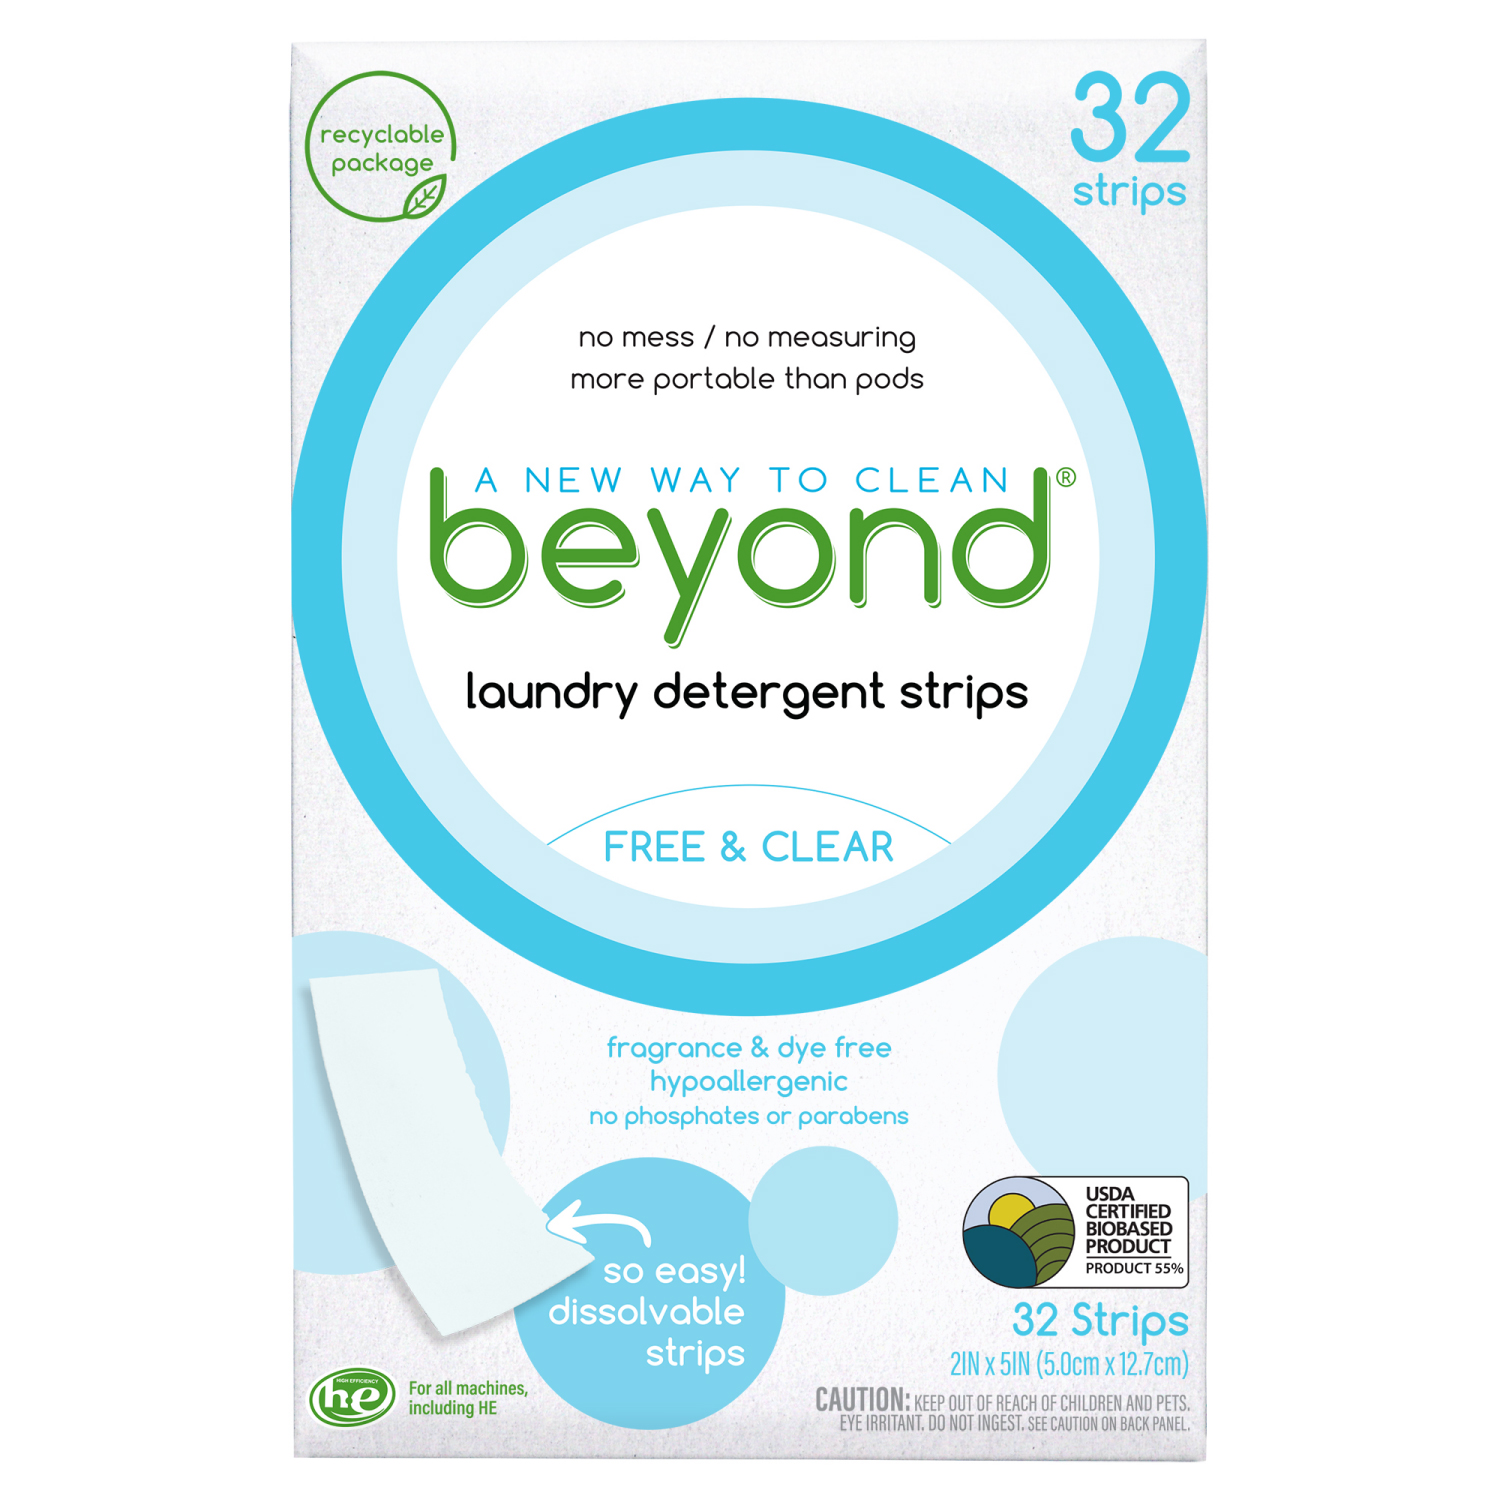 Beyond Laundry Detergent Strips [32 strips] - Free & Clear - image 1 of 7